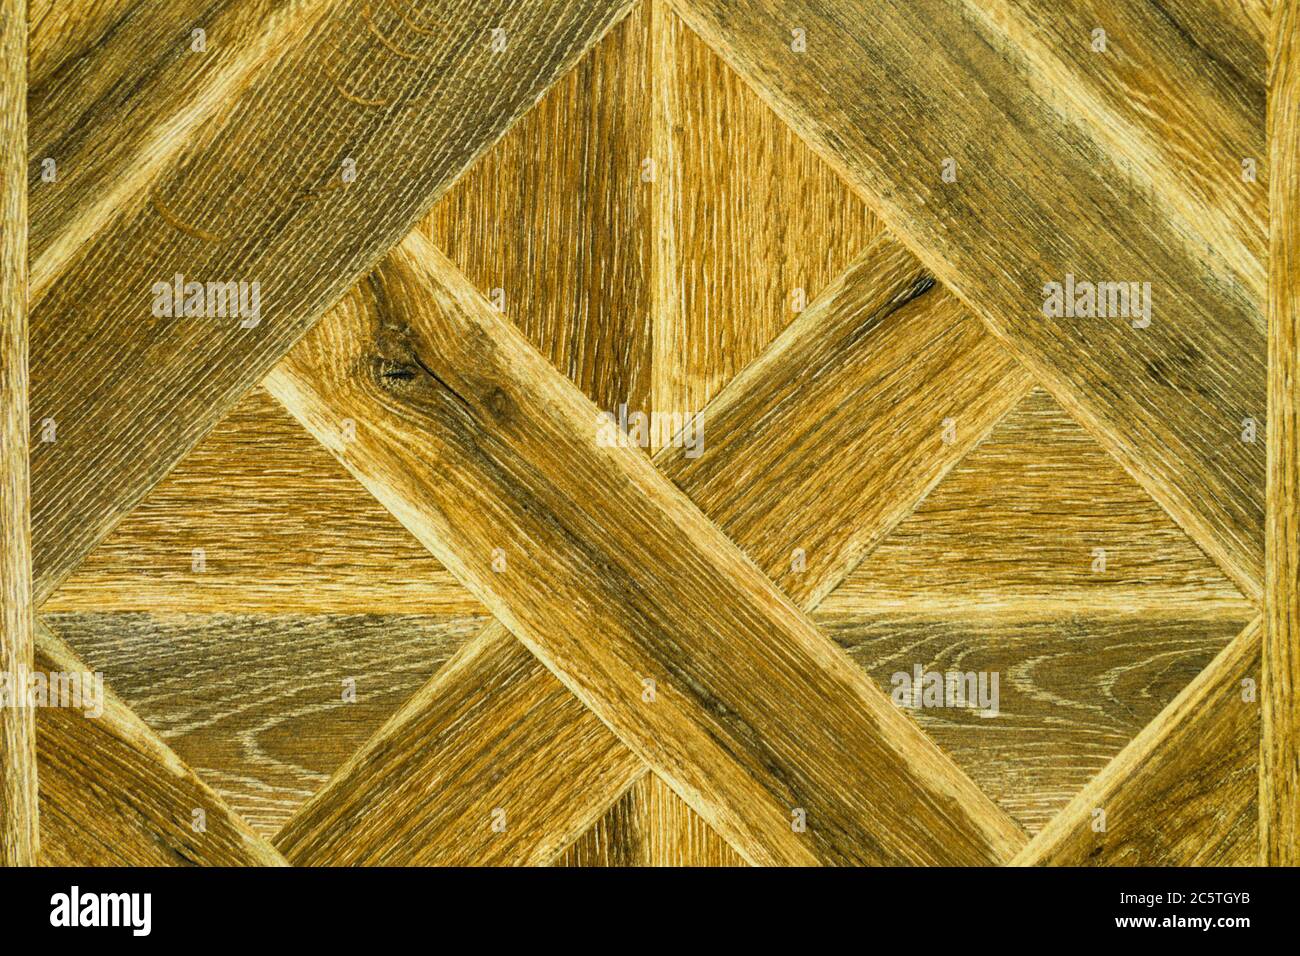 Wood Laminate, Wood Floor Texture, Wood Background, Wooden Parquet Surface Stock Photo